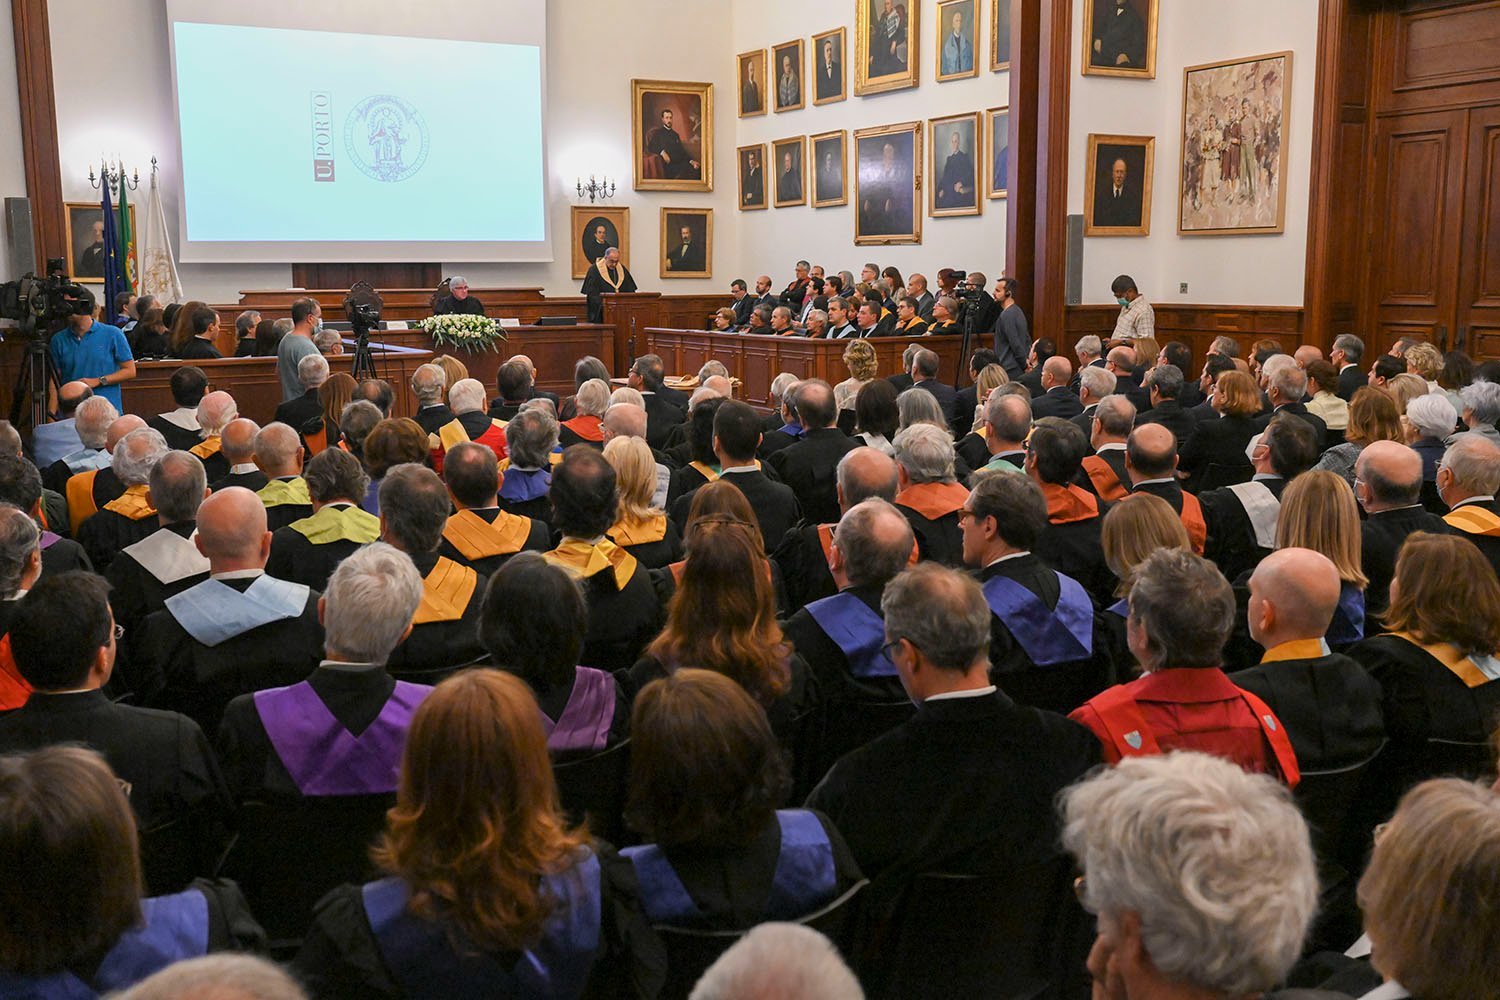 University Day Ceremony at the Rectory Hall